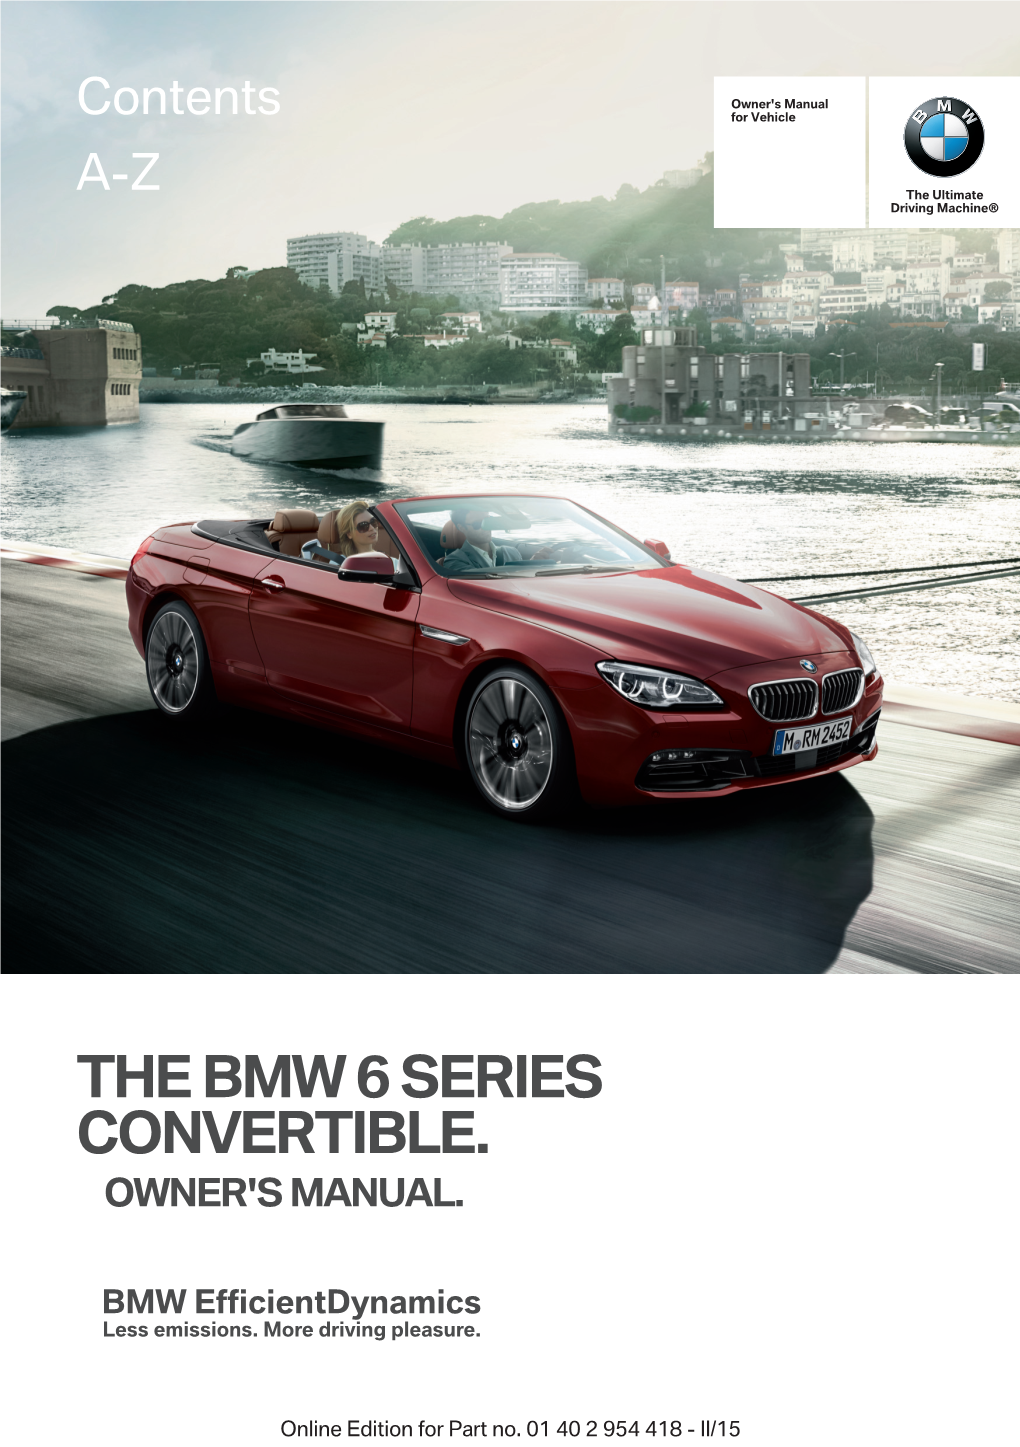 The Bmw 6 Series Convertible. Owner's Manual